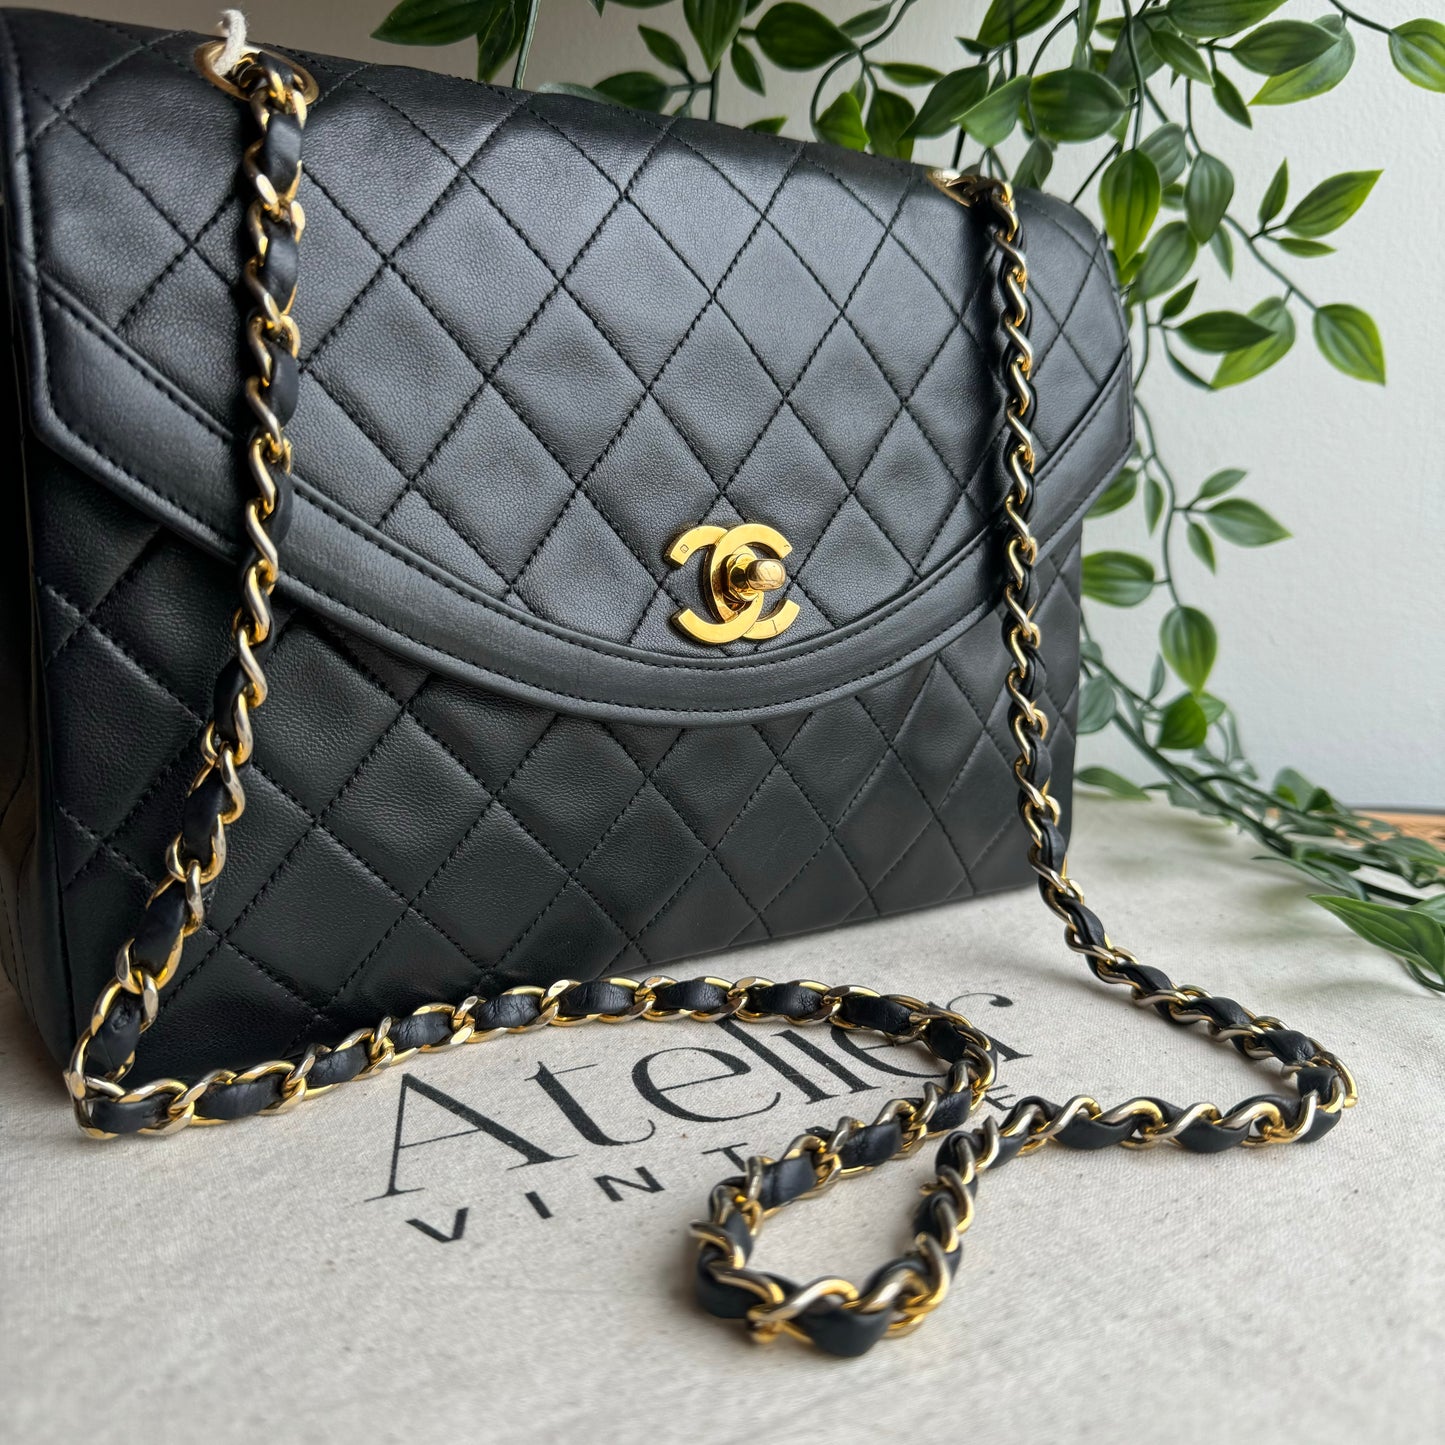 Chanel 1986 Curved Single Flap